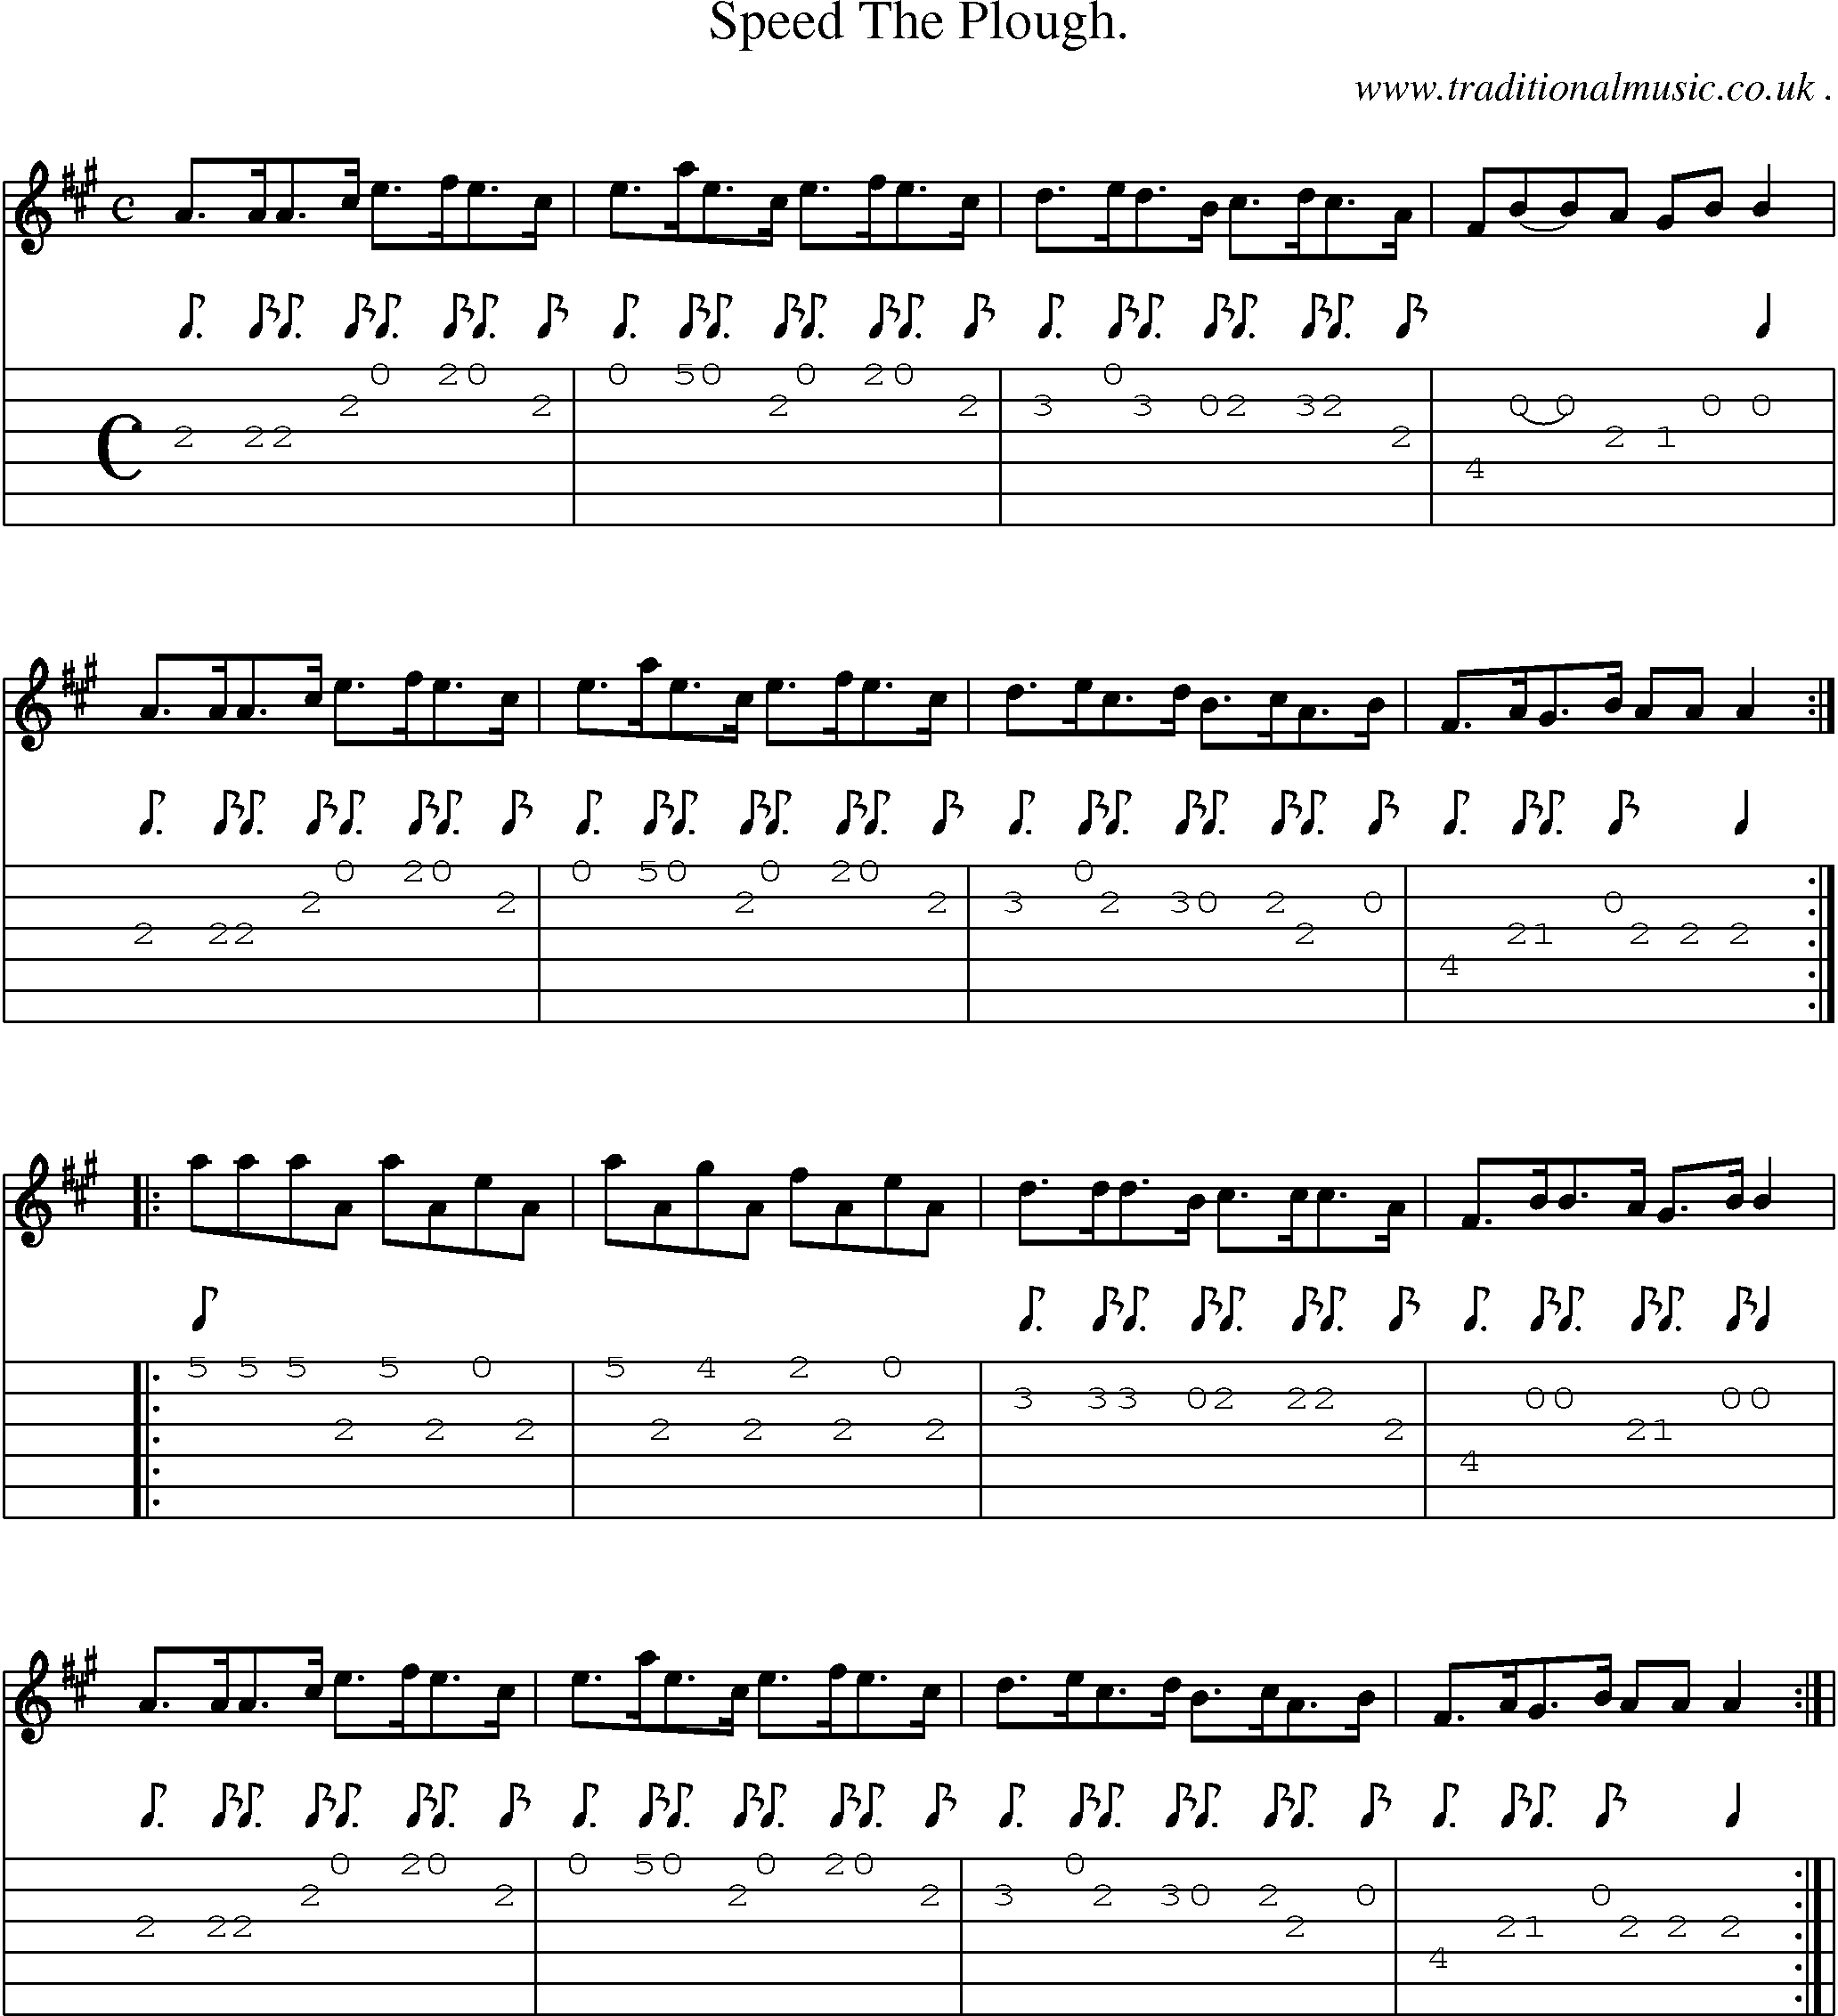 Sheet-Music and Guitar Tabs for Speed The Plough